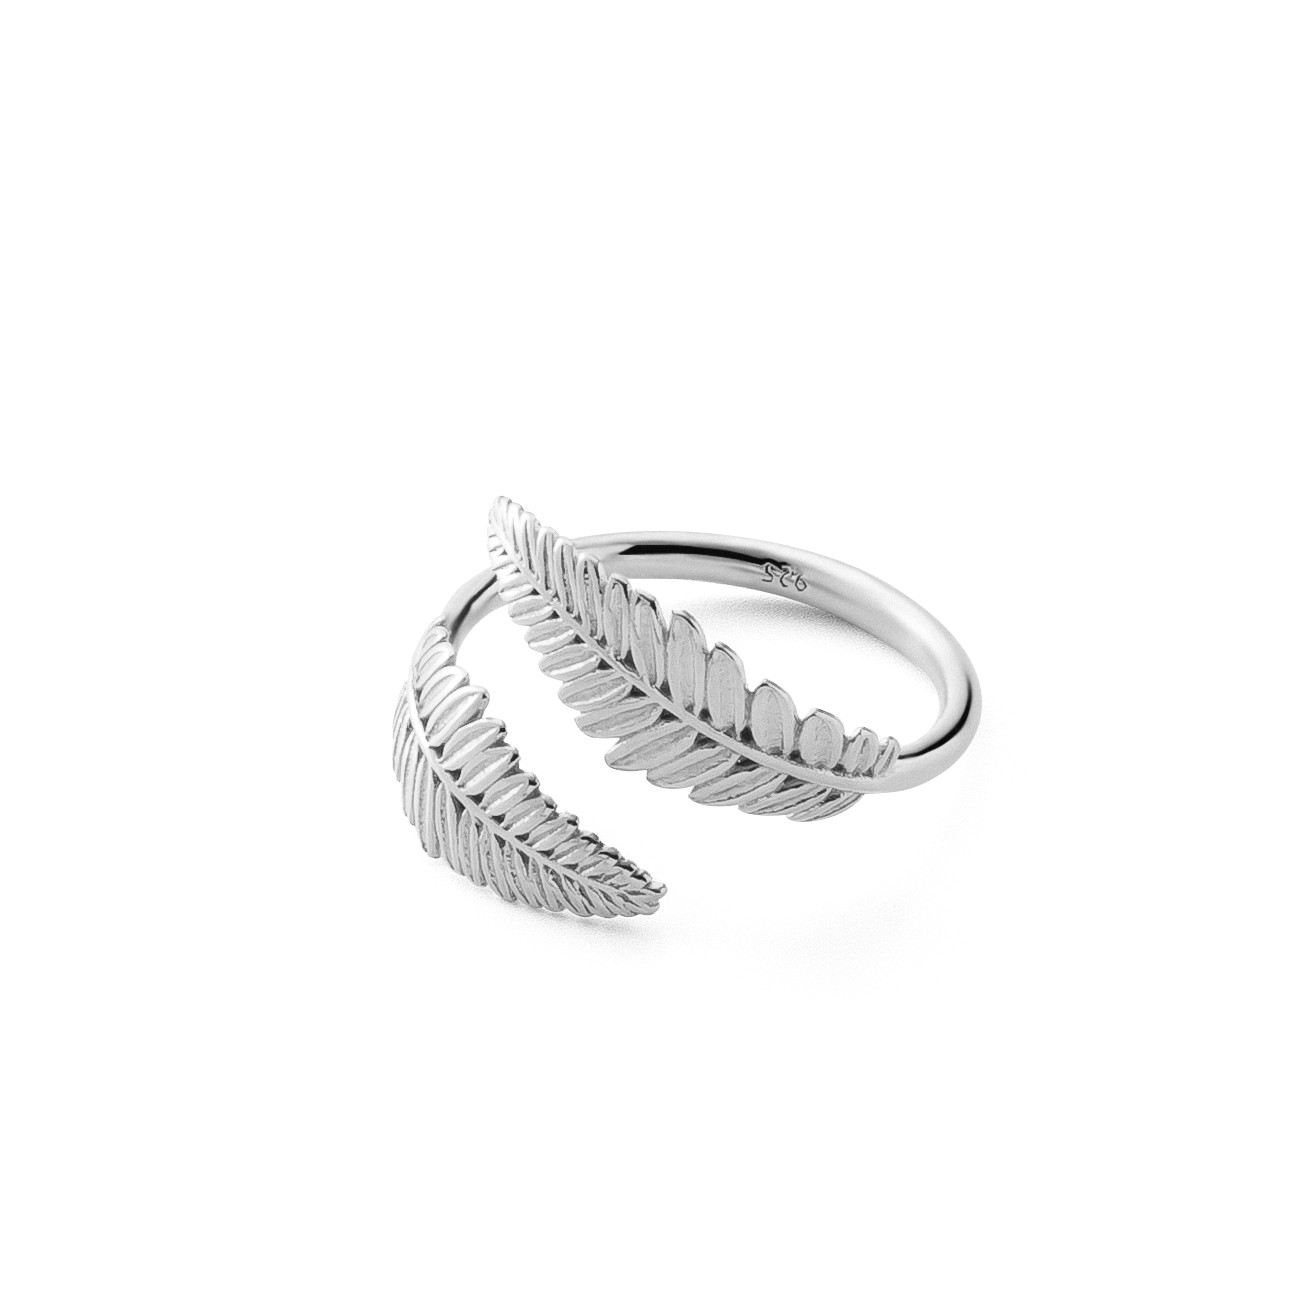 Giorre Woman's Ring 33510